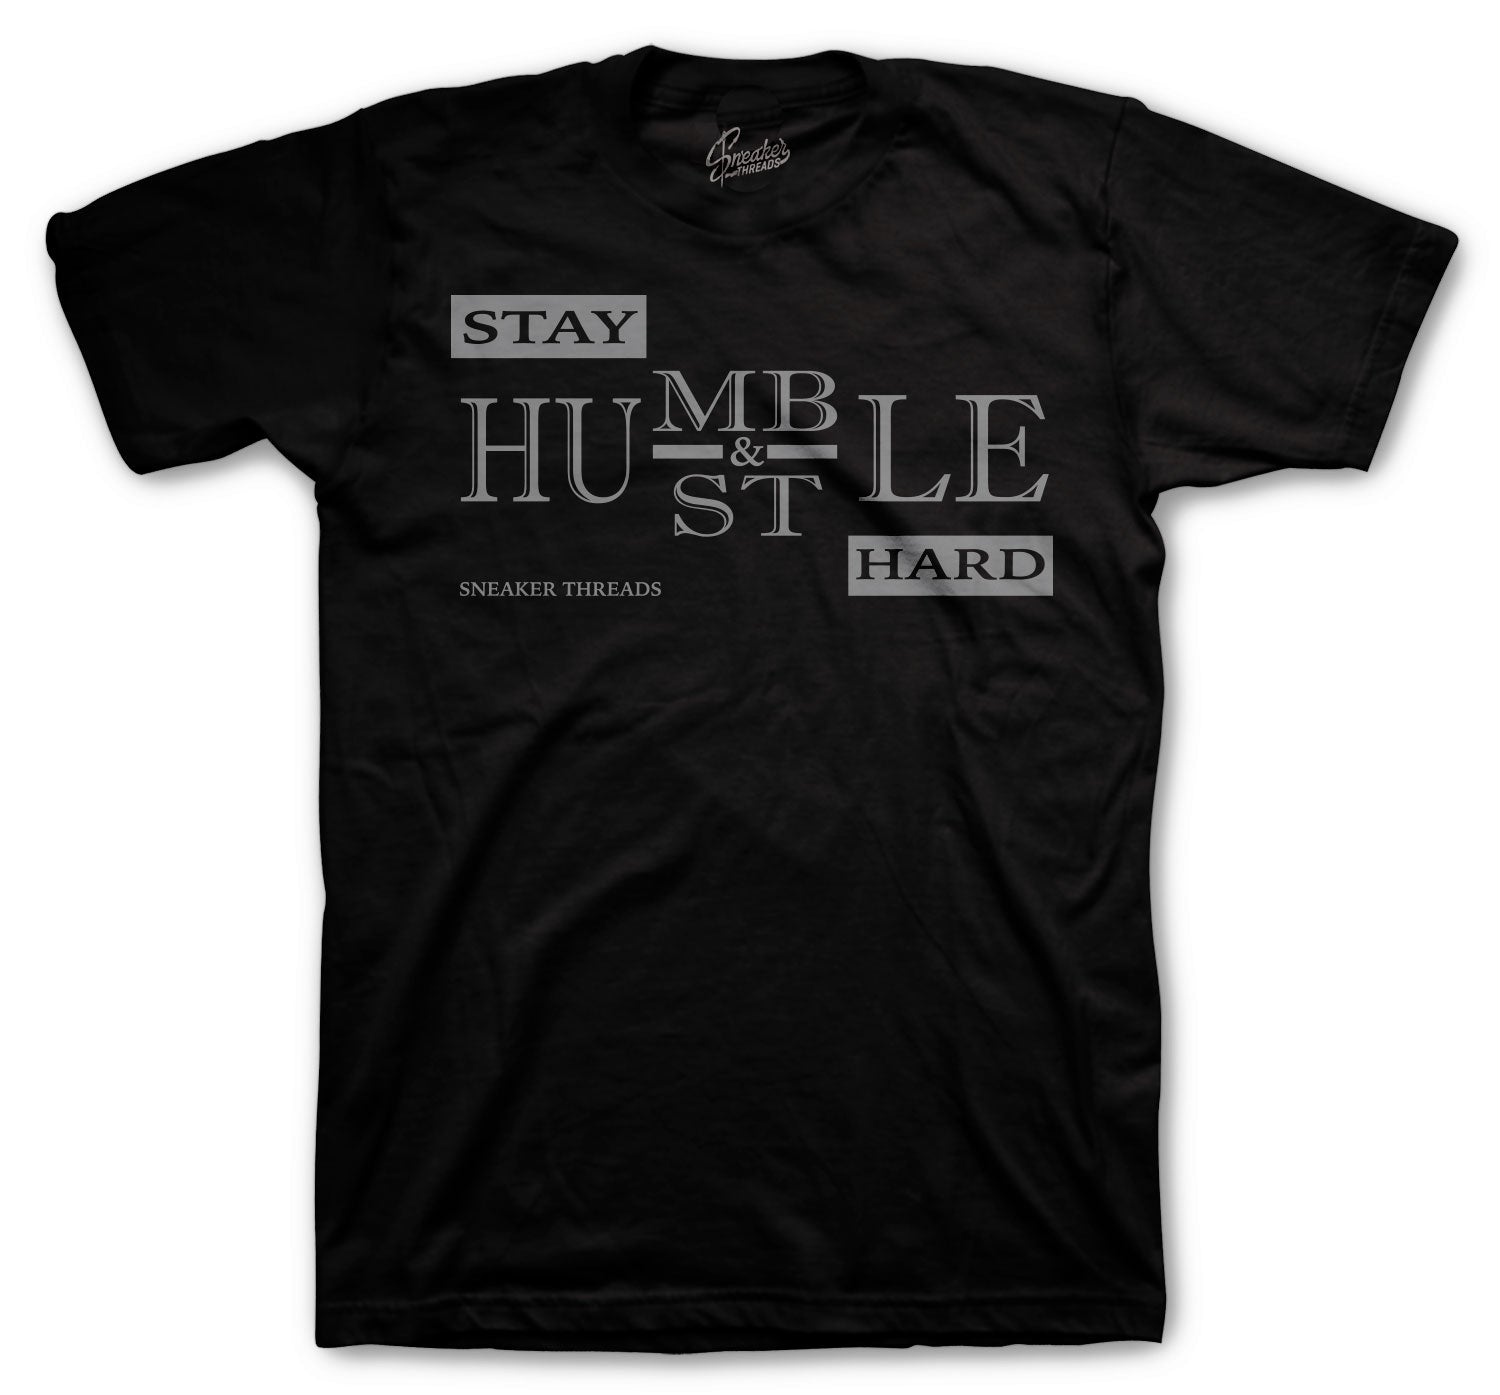 Foamposiite Black Mini Swoosh Humble shirts to match best with sneaker